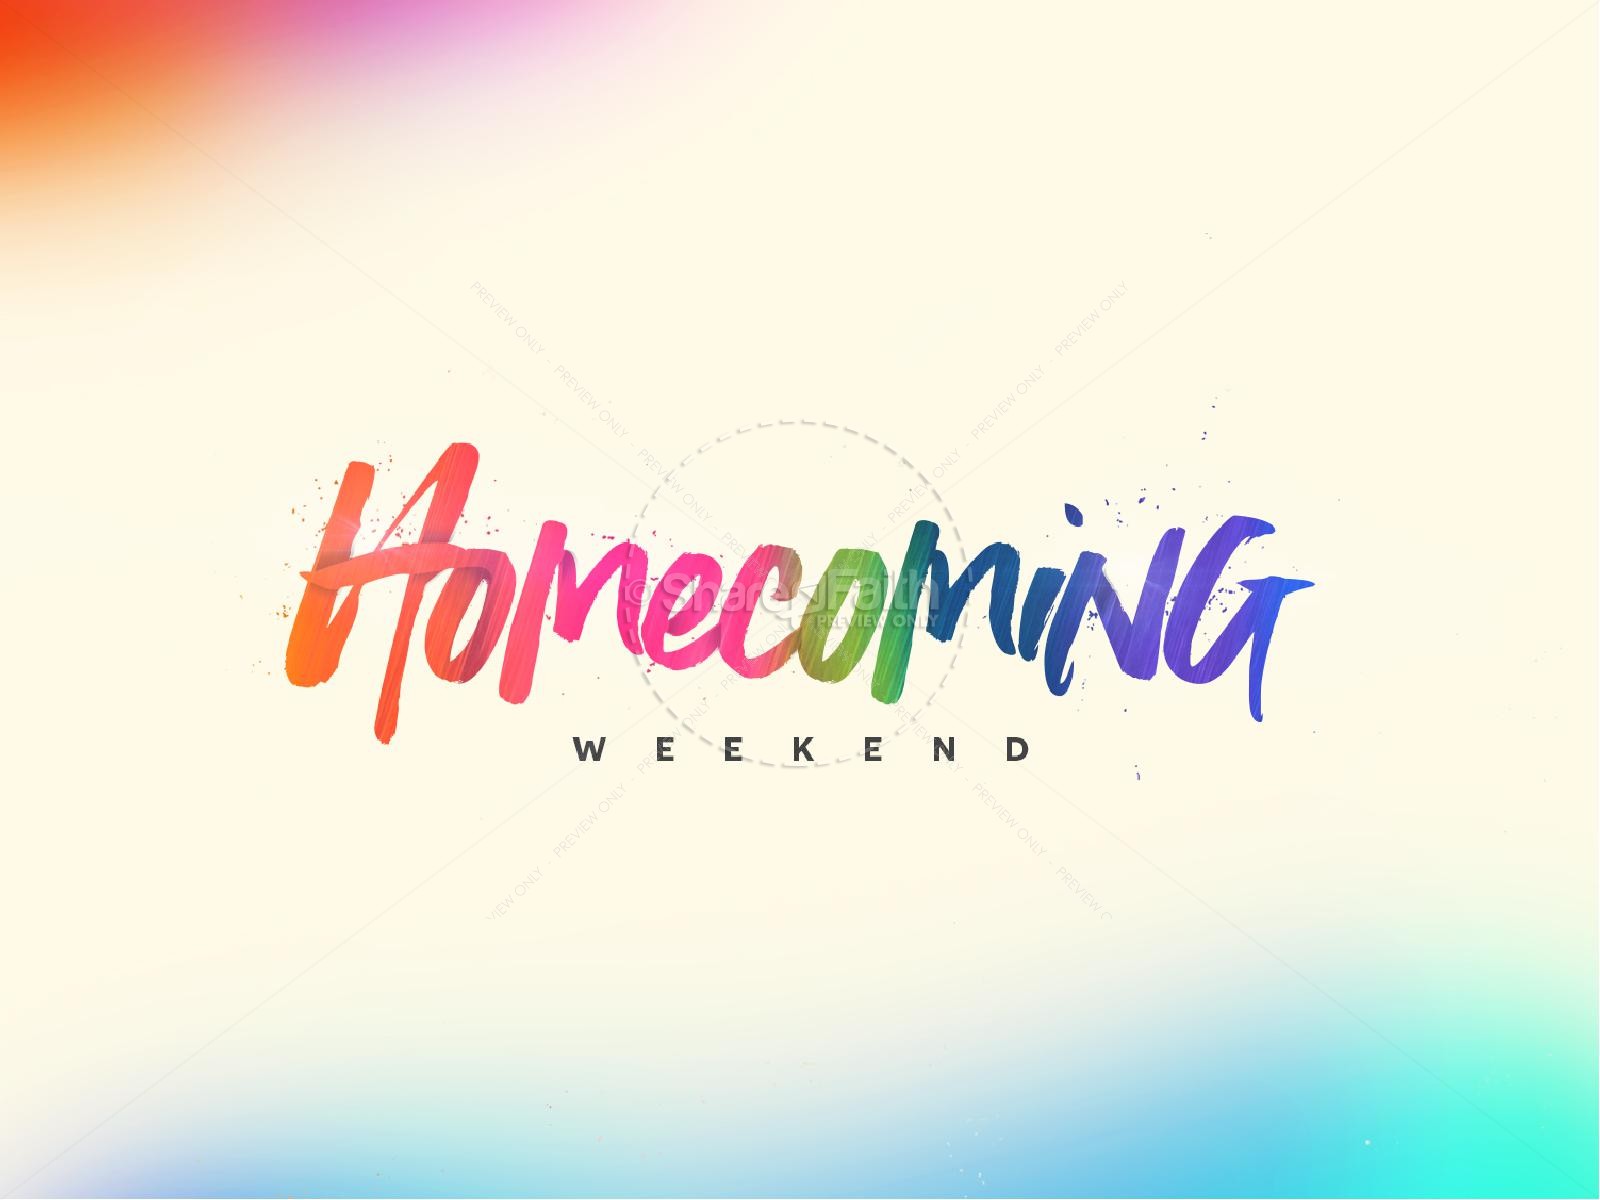 Homecoming Weekend Church PowerPoint | Clover Media